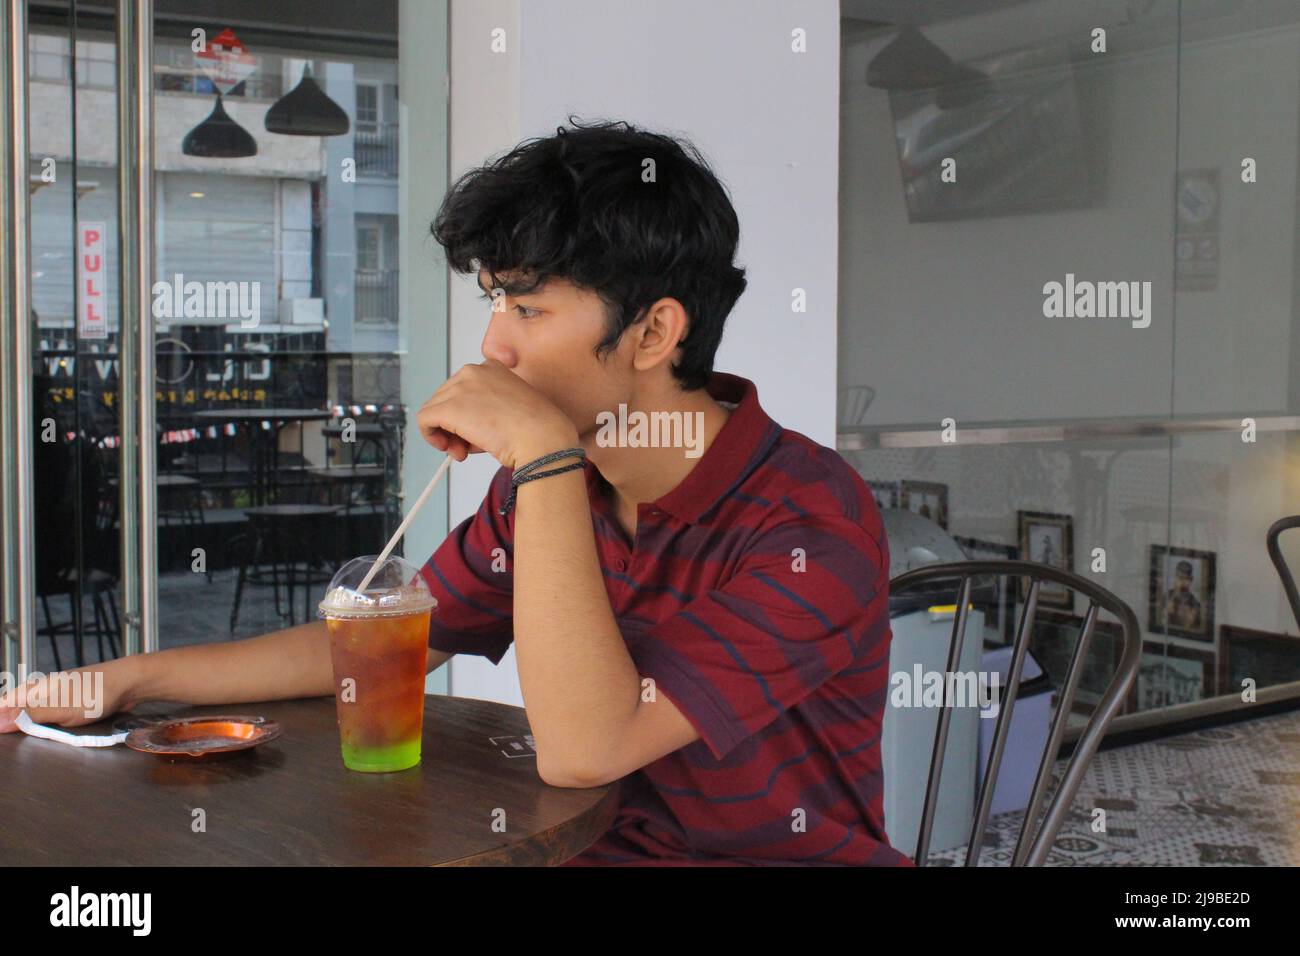 Yogyakarta, Indonesia - 08 07 2019: a man enjoying his drink while on vacation in a special area of Yogyakarta, Central Java Stock Photo